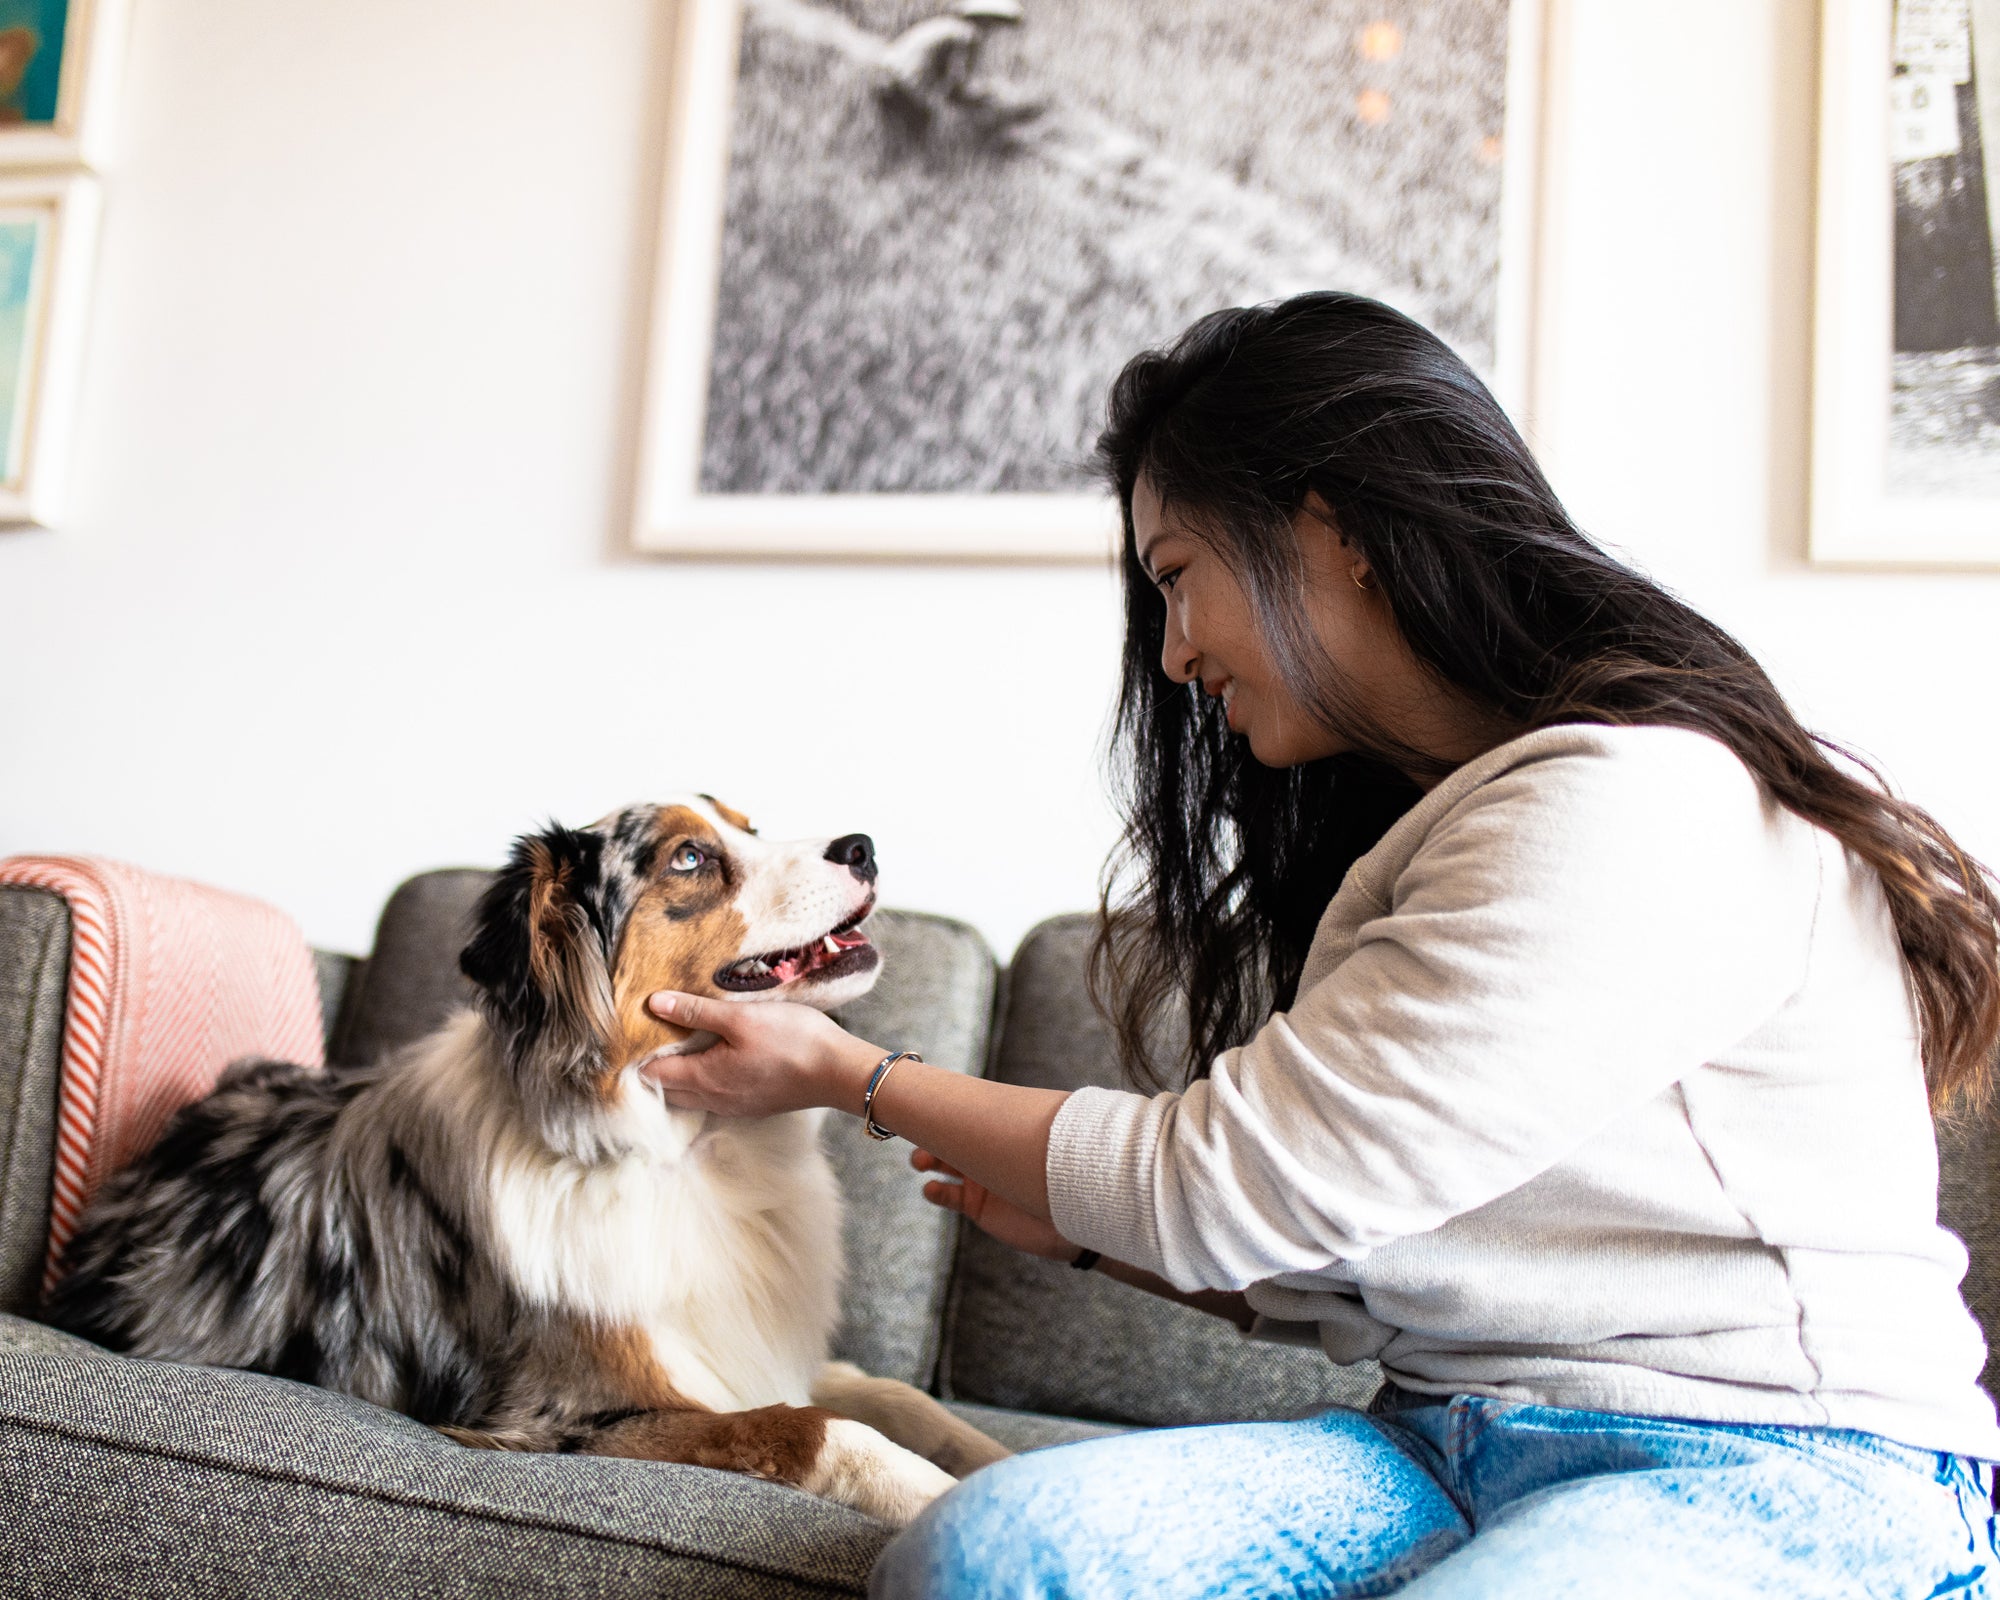 Australian shepherd being pet on a couch by a woman